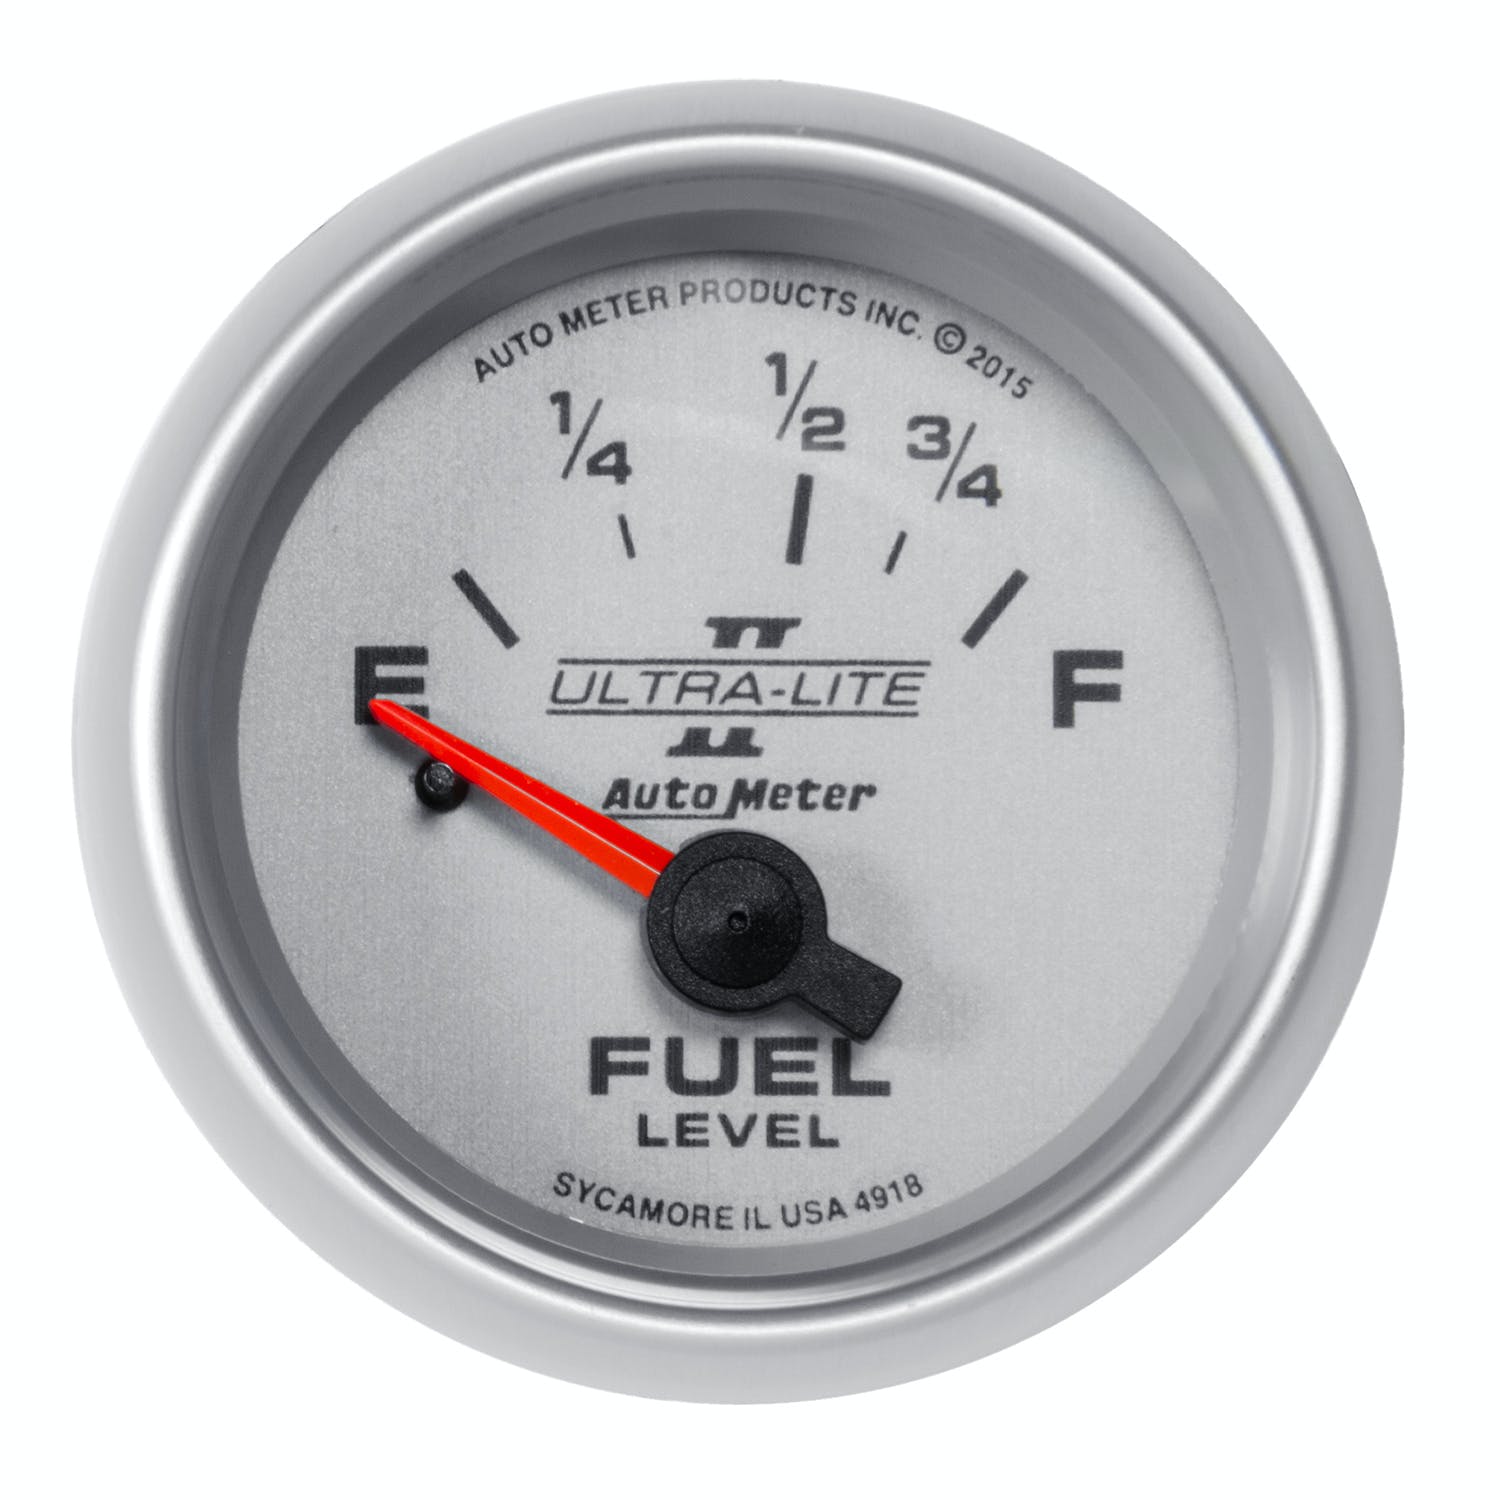 AutoMeter Products 4918 Fuel Level Gauge 2 1/16, 16E - 158F Electric Ultra-Lite II